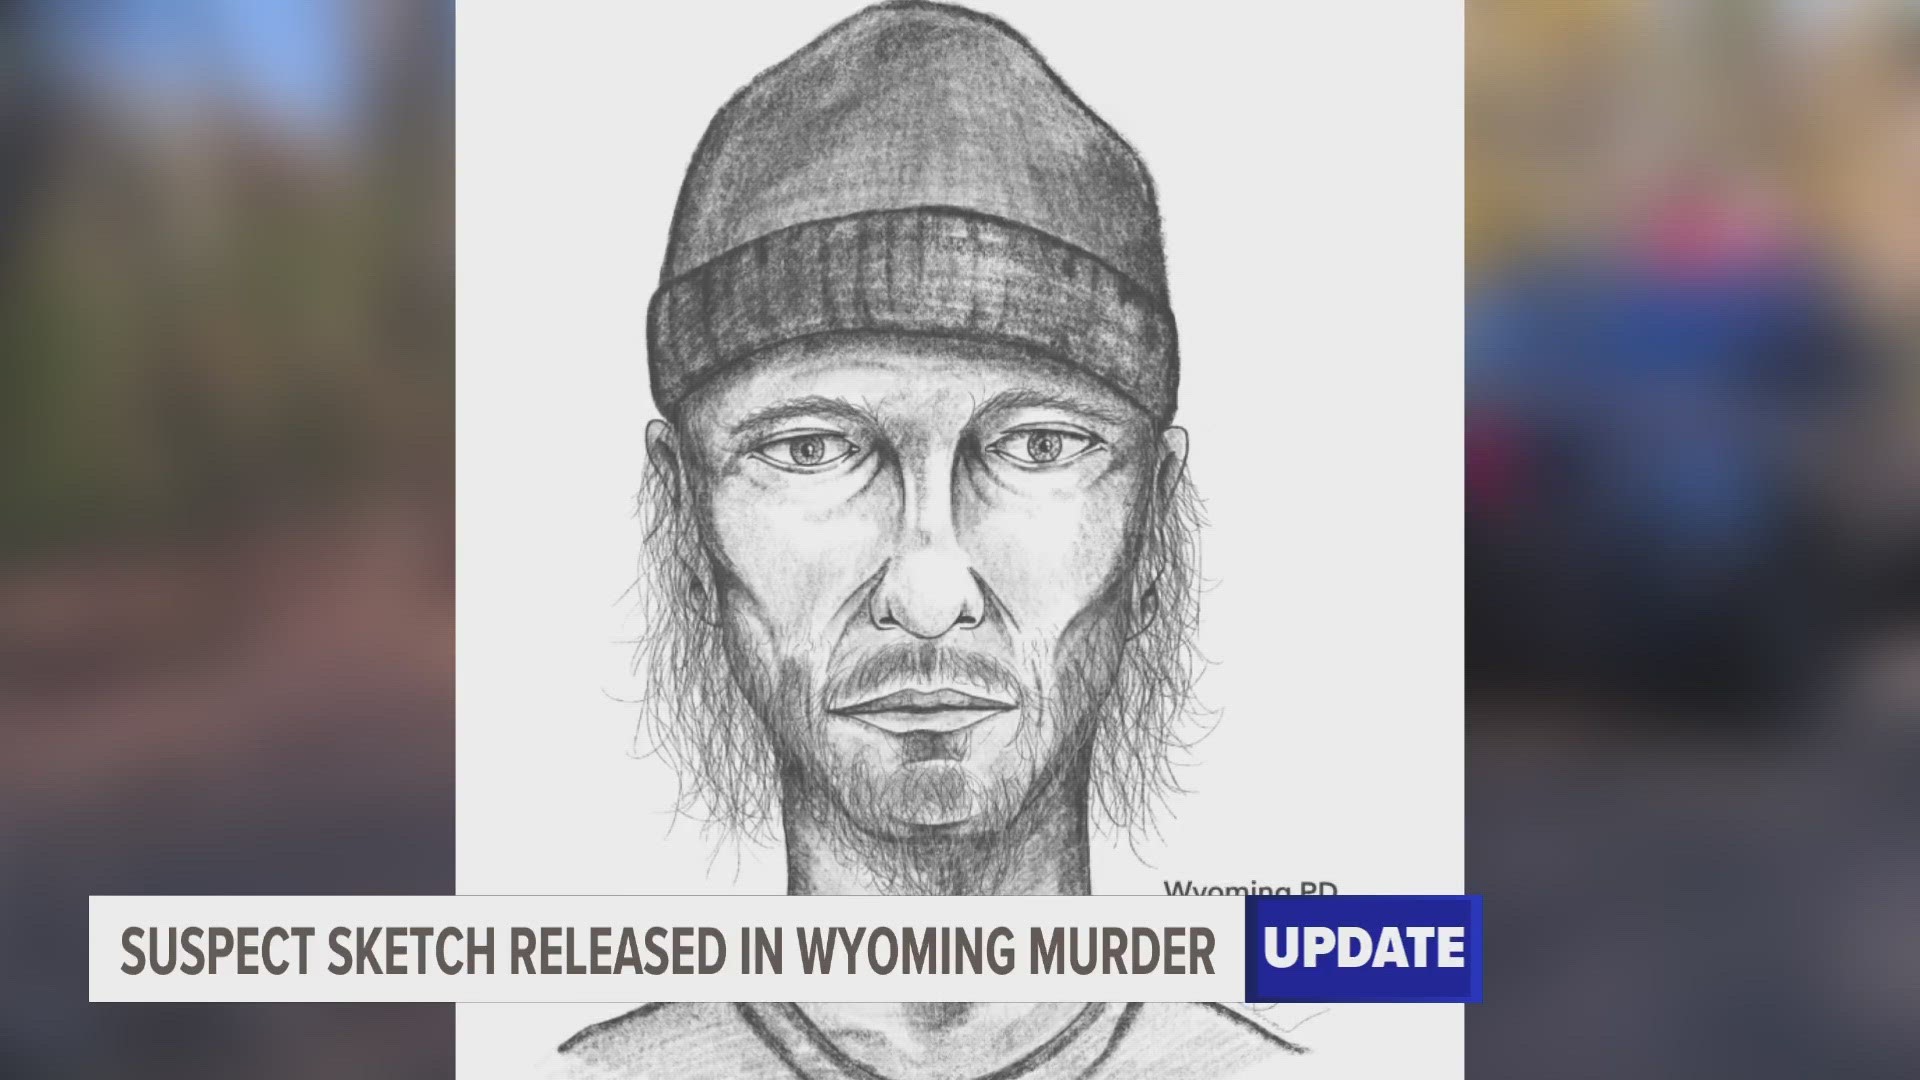 Kane Coronado was killed on Indian Mounds Drive in Wyoming on Nov. 1. The Wyoming Department of Public Safety has now released a description of a suspect.